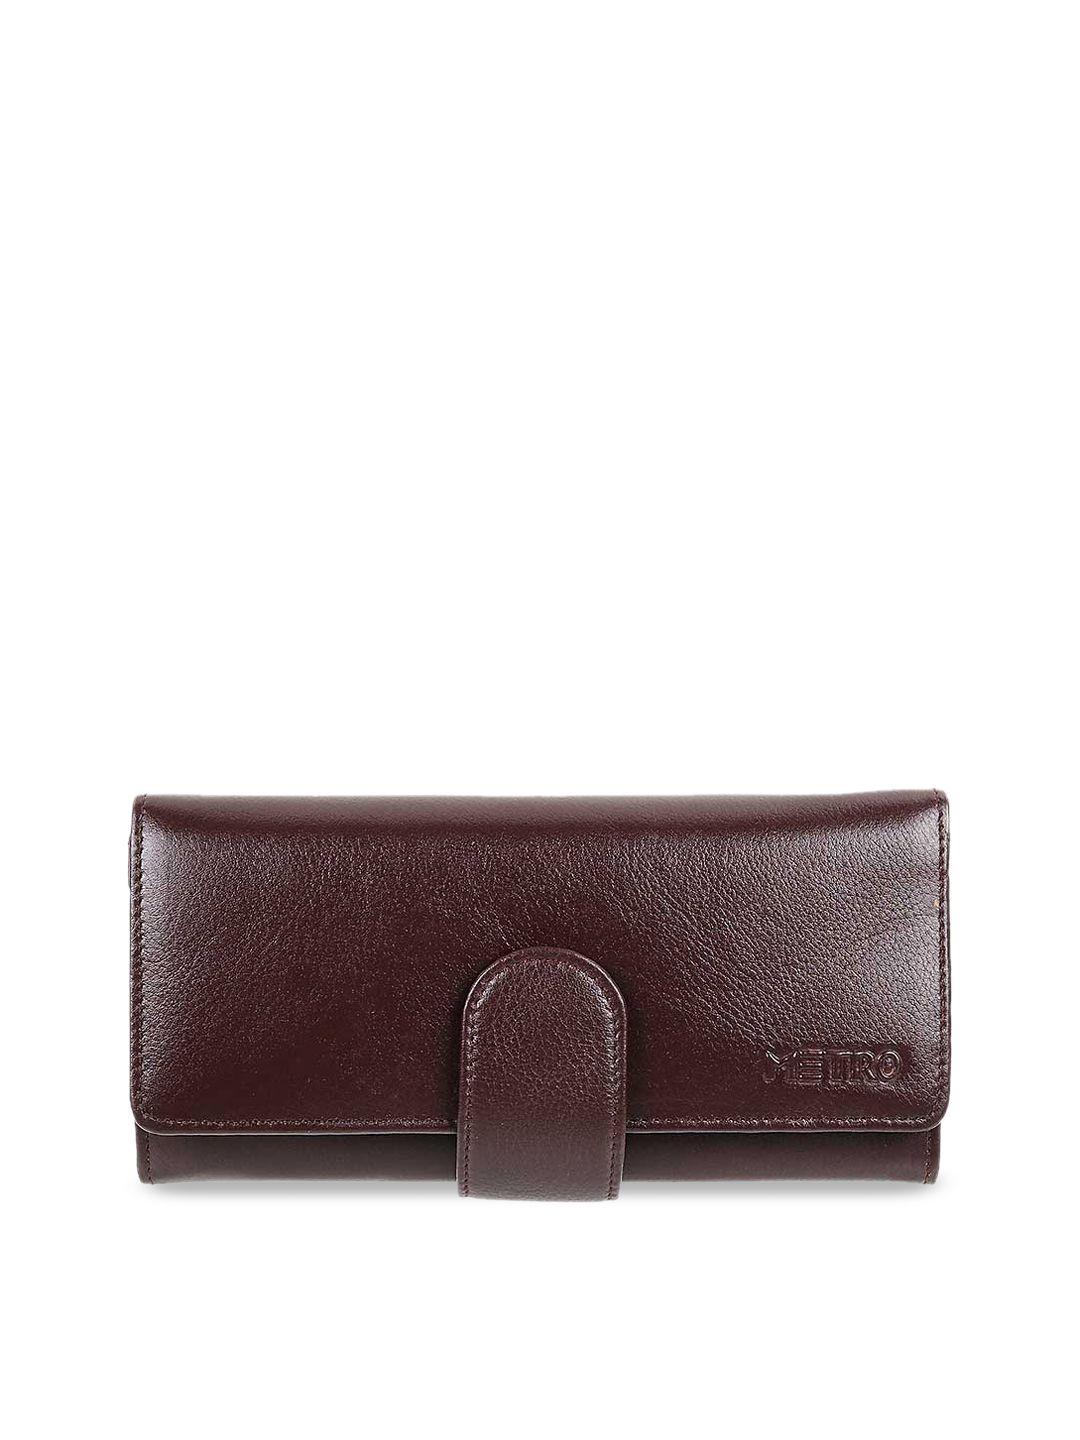 metro brown solid clutch